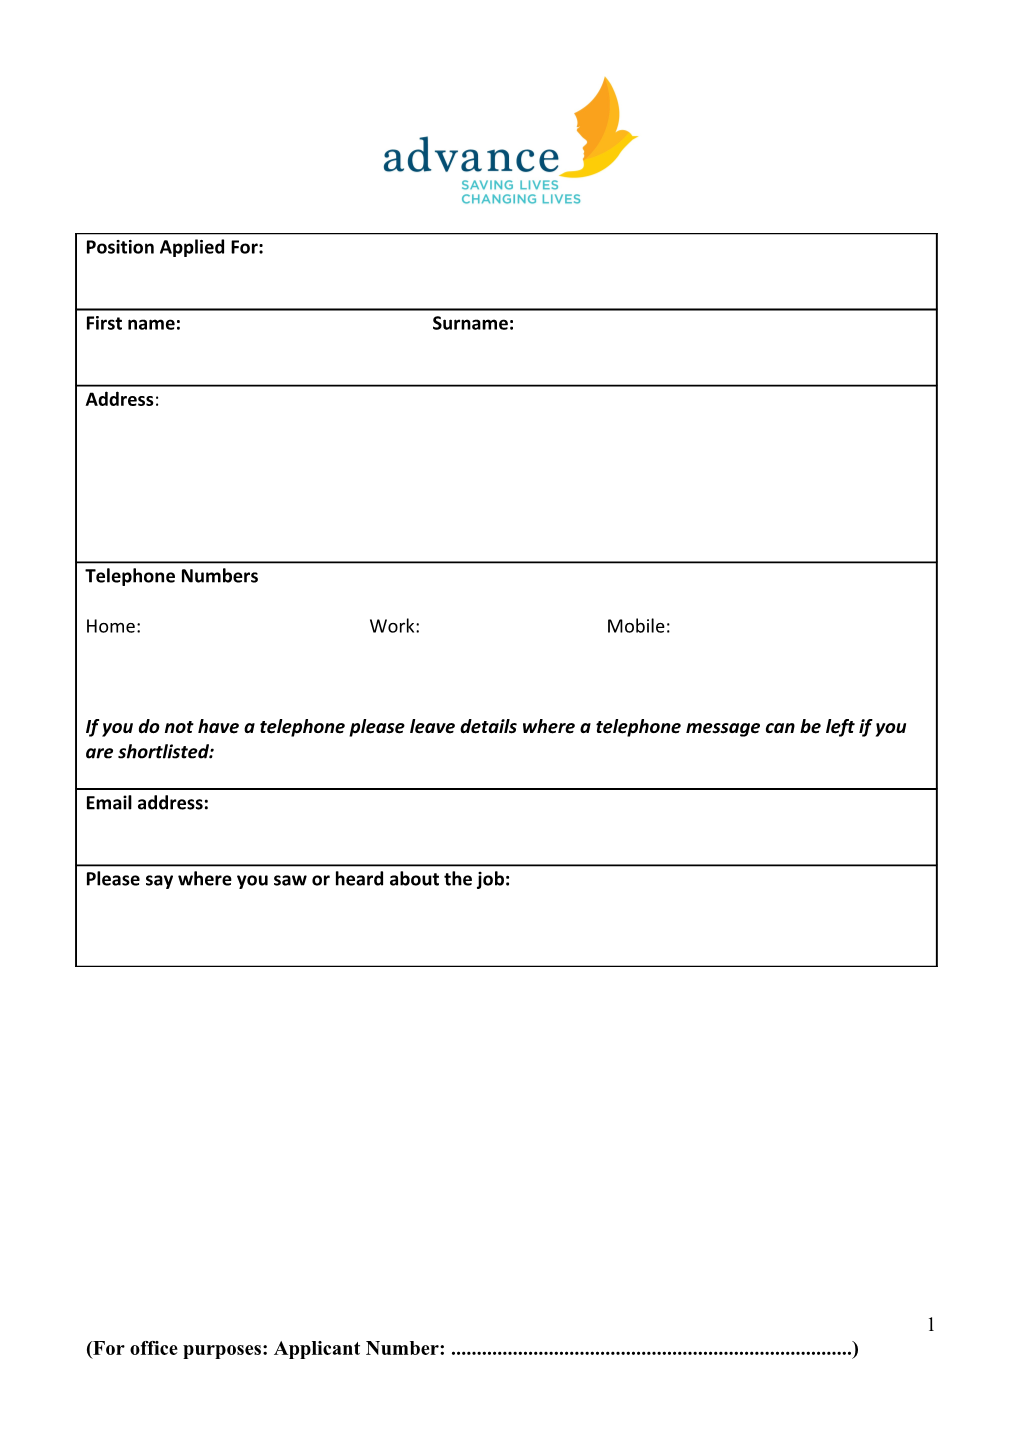 Completed Applications Should Be Emailed To